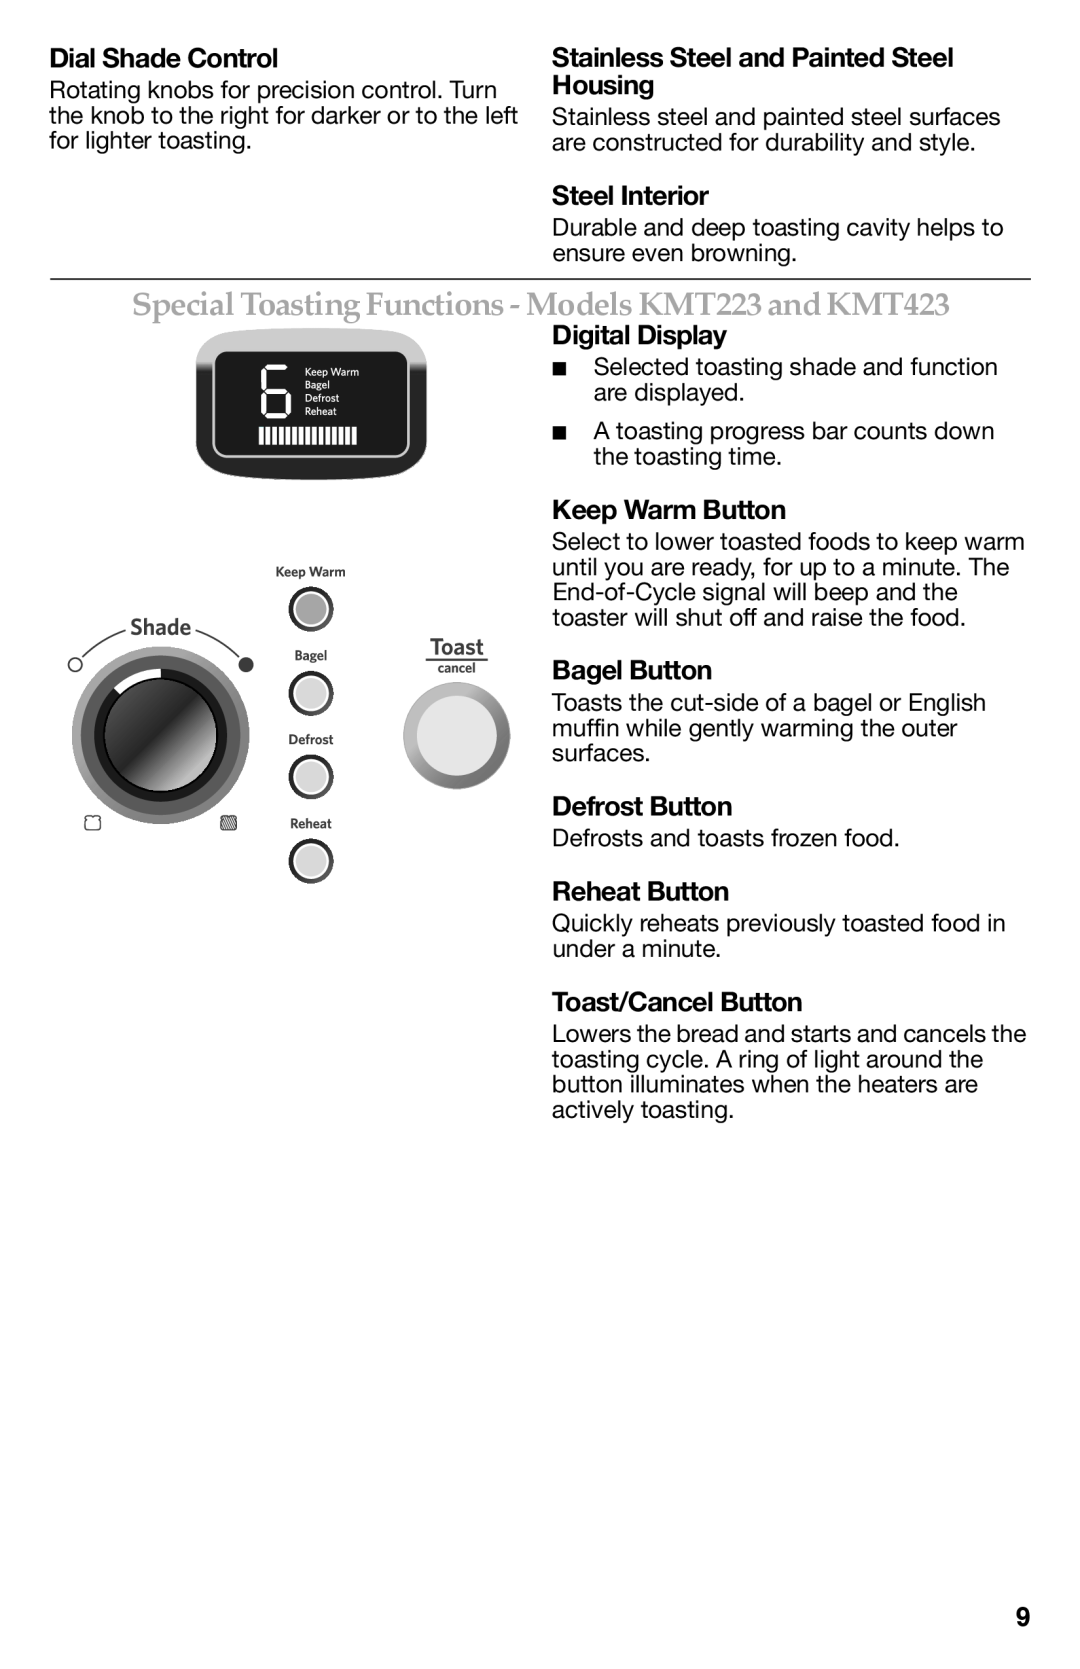 KitchenAid KMT222 Dial Shade Control, Keep Warm Button, Toast/Cancel Button, Stainless Steel and Painted Steel Housing 